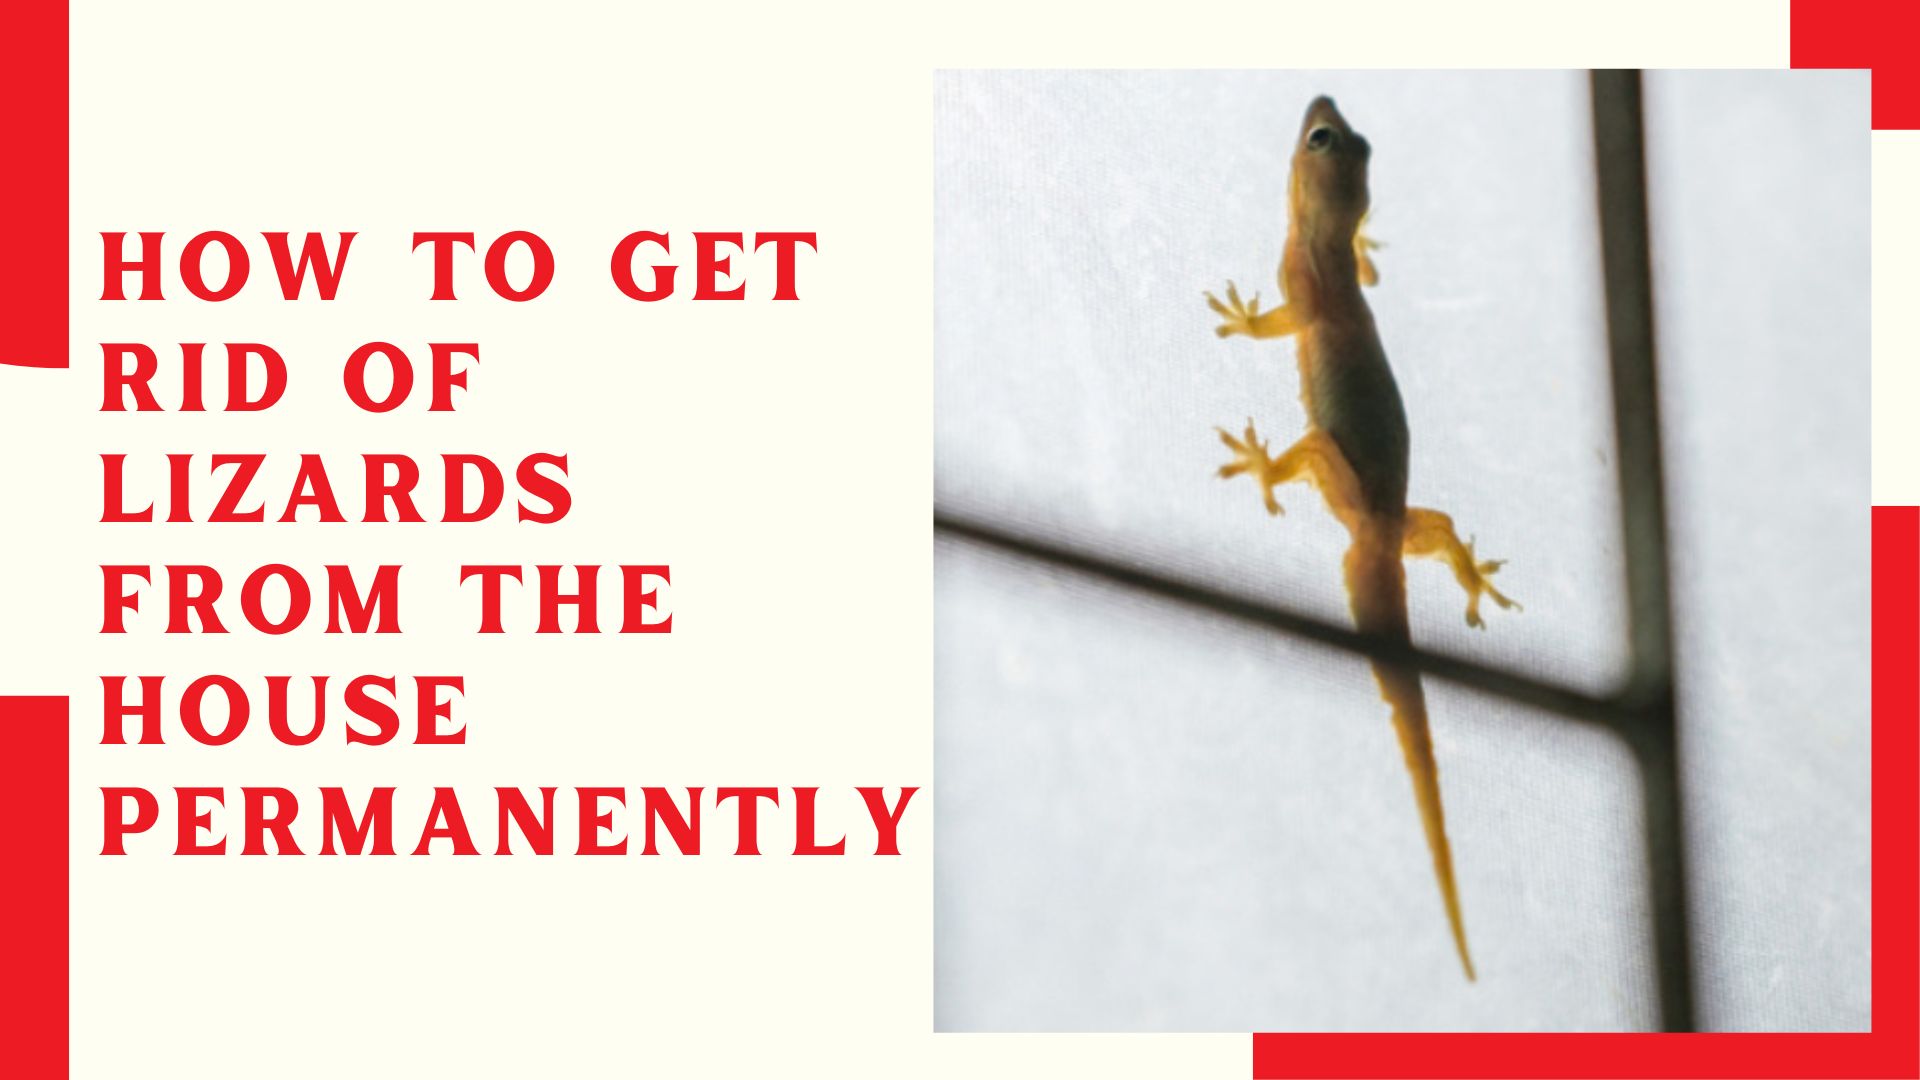 How To Get Rid Of Lizards From The House Permanently